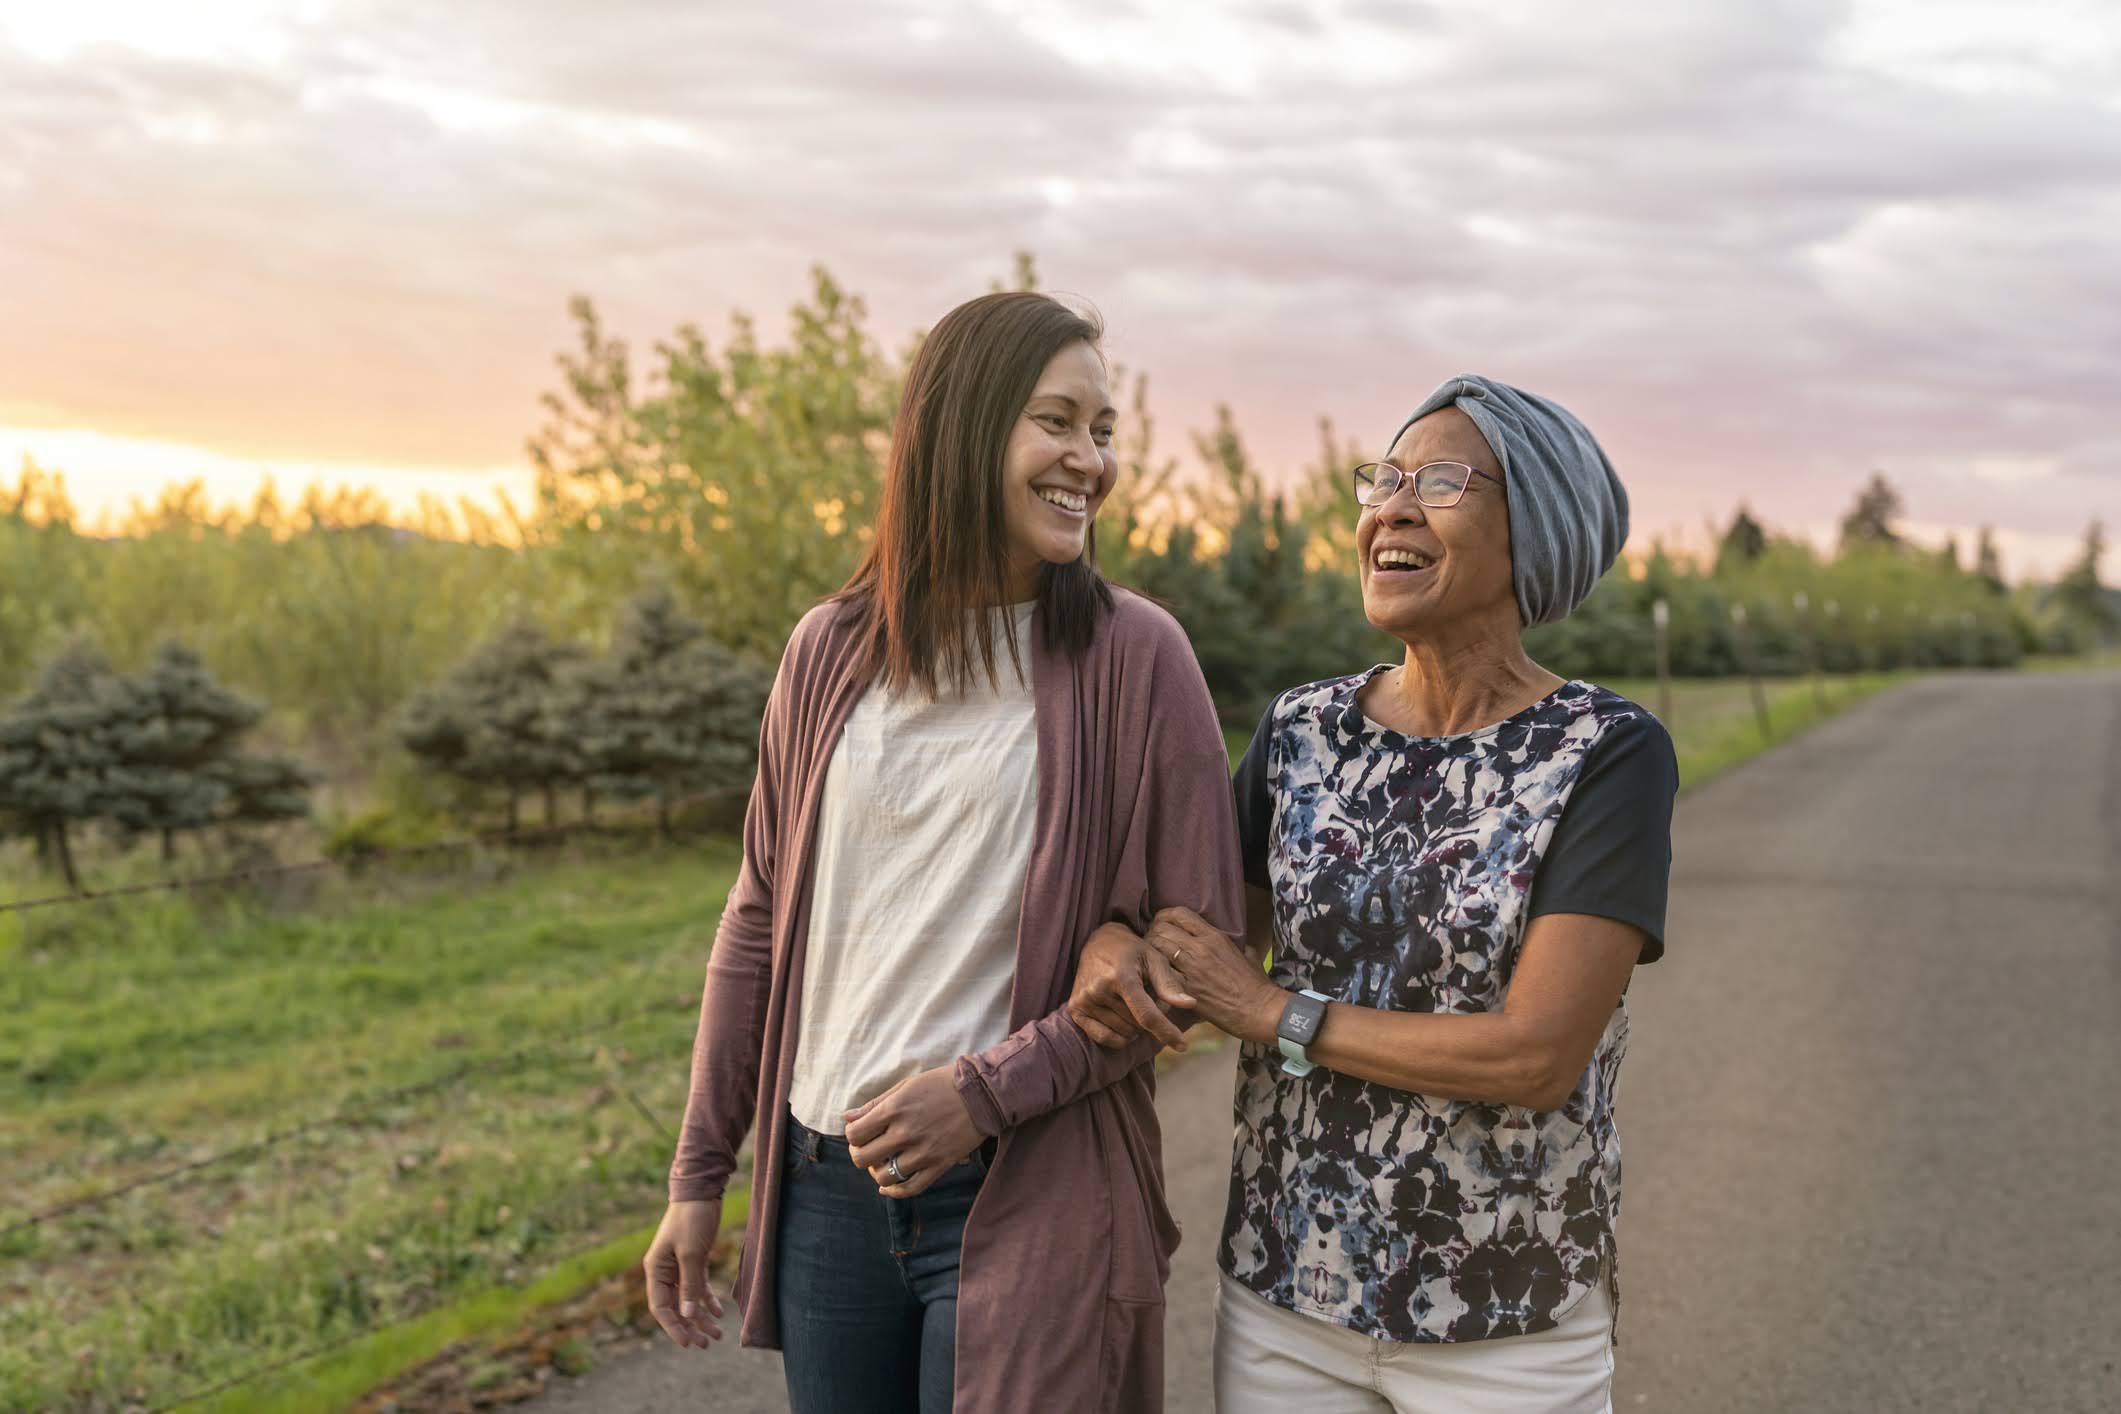 New multicultural wellbeing campaign encourages community to stay connected